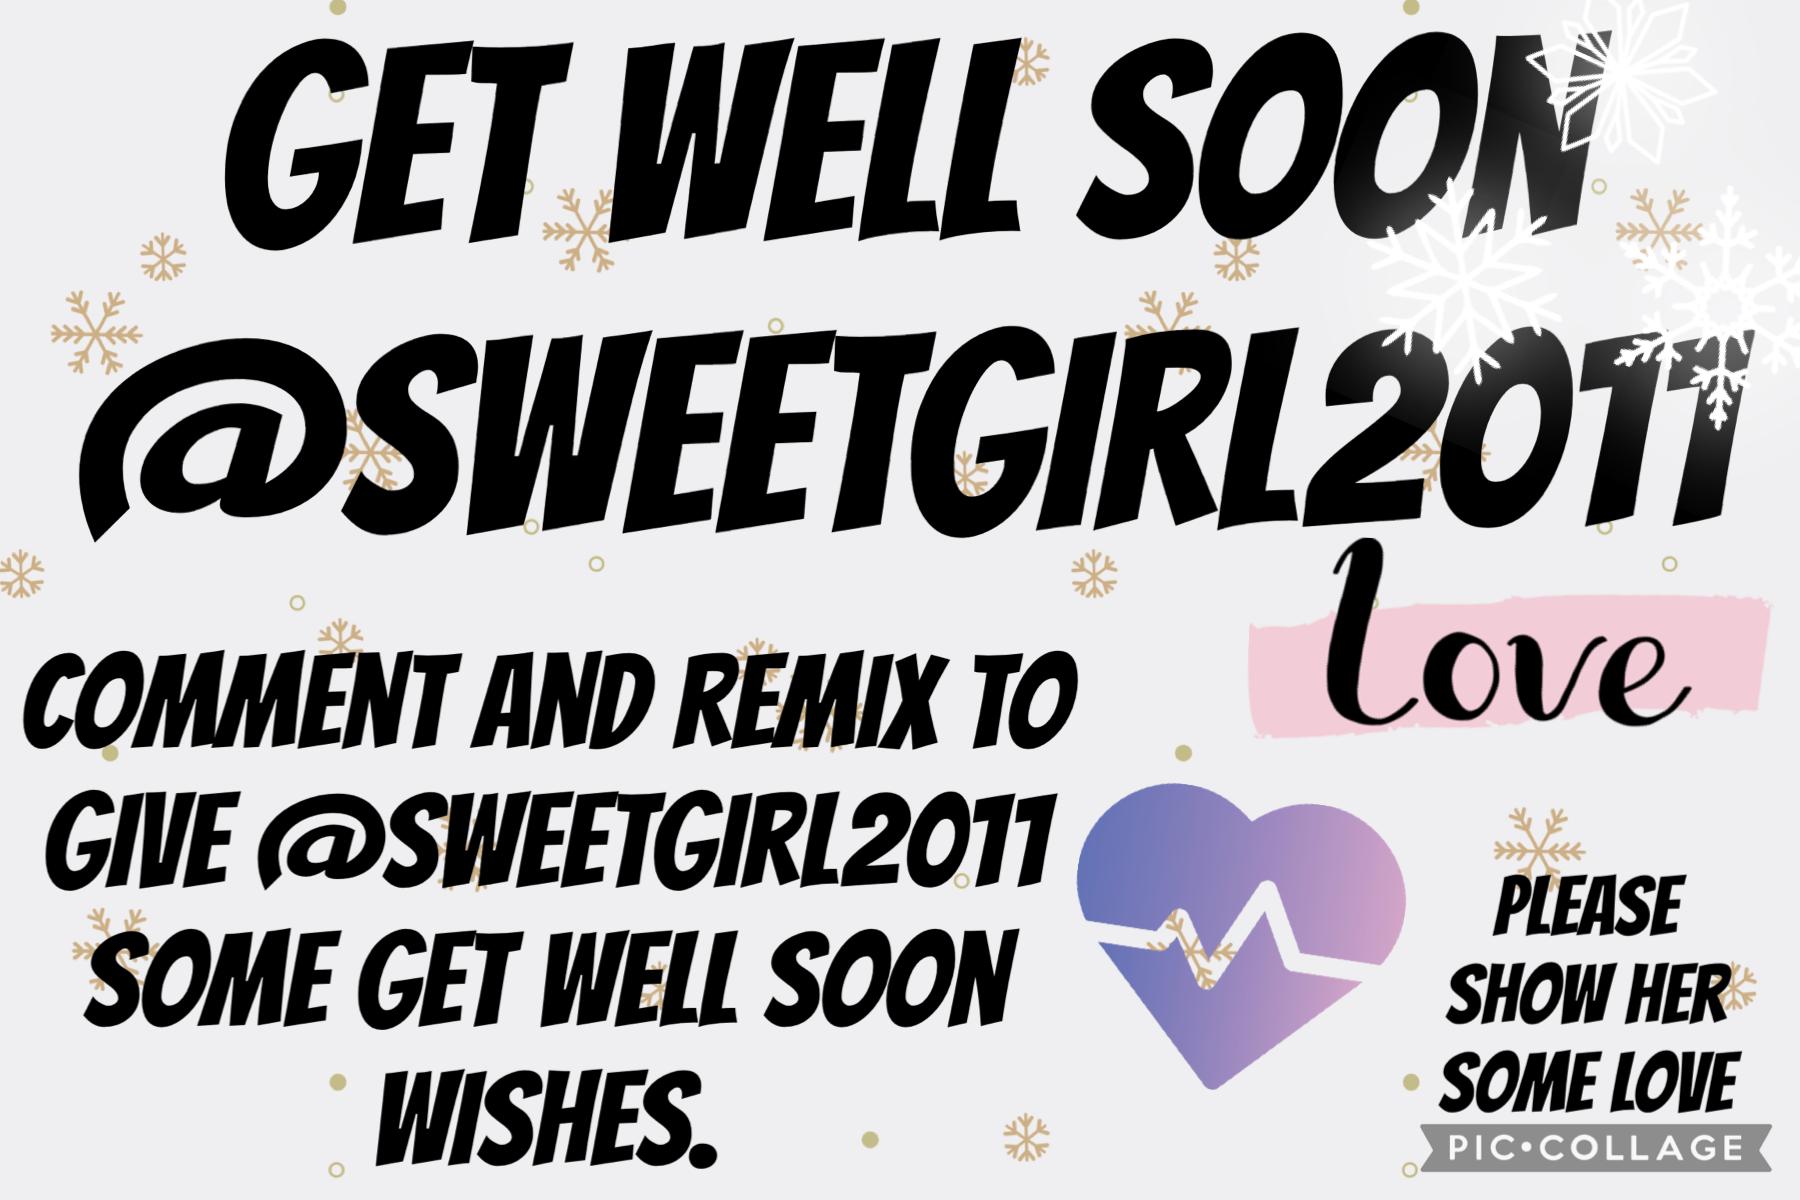 Get Well Soon @SWEETGIRL2011 

comment and remix to show her some love 💗 
